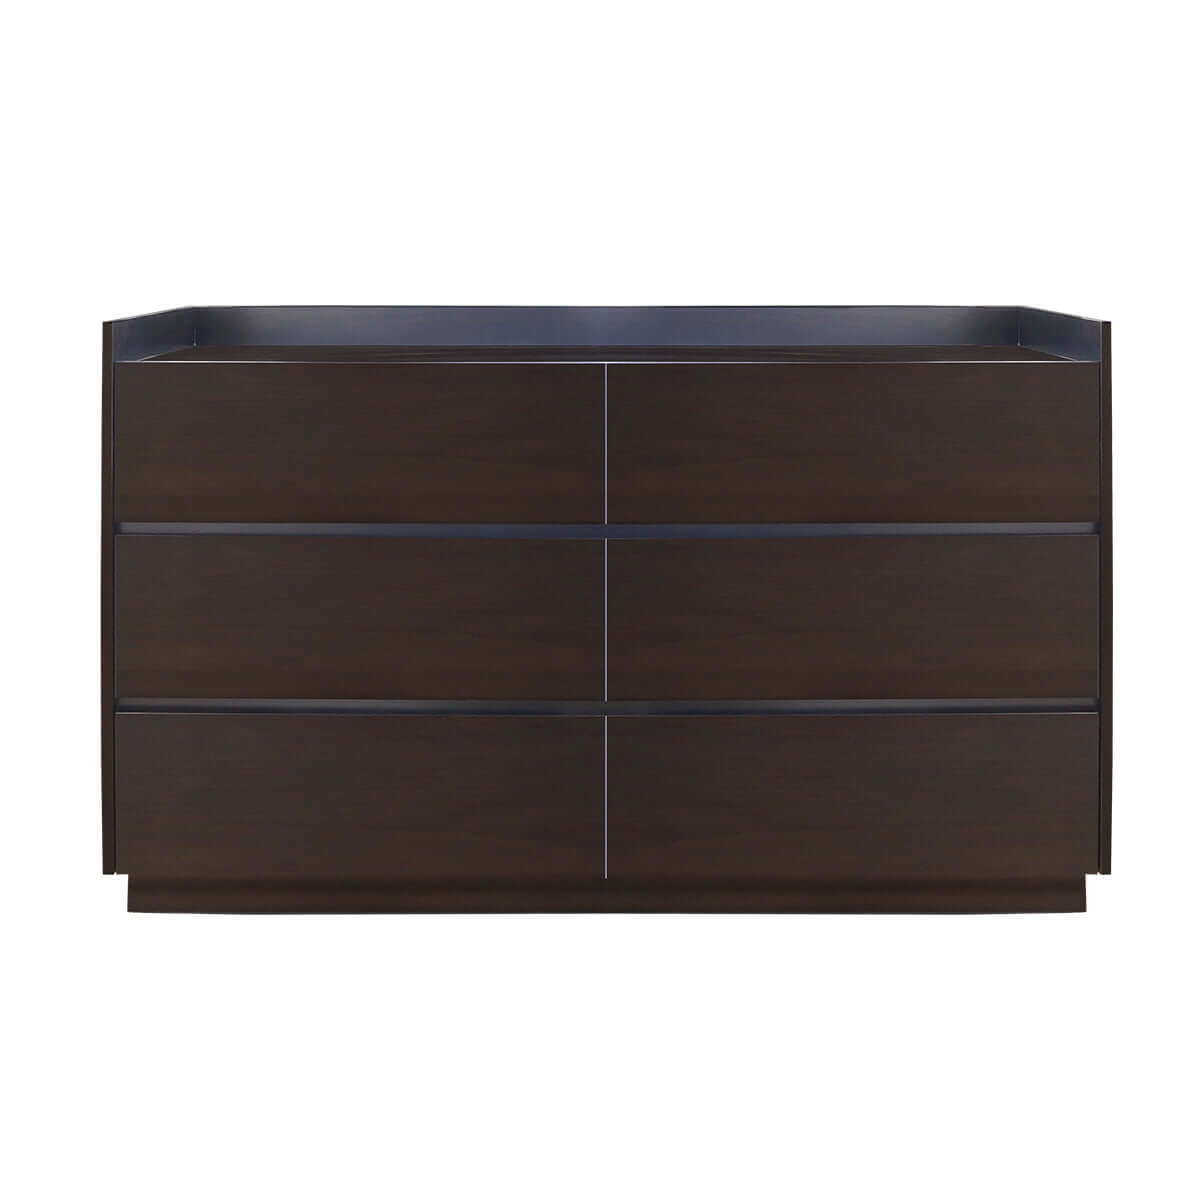 indonesian furniture online - wood large dresser with six drawers